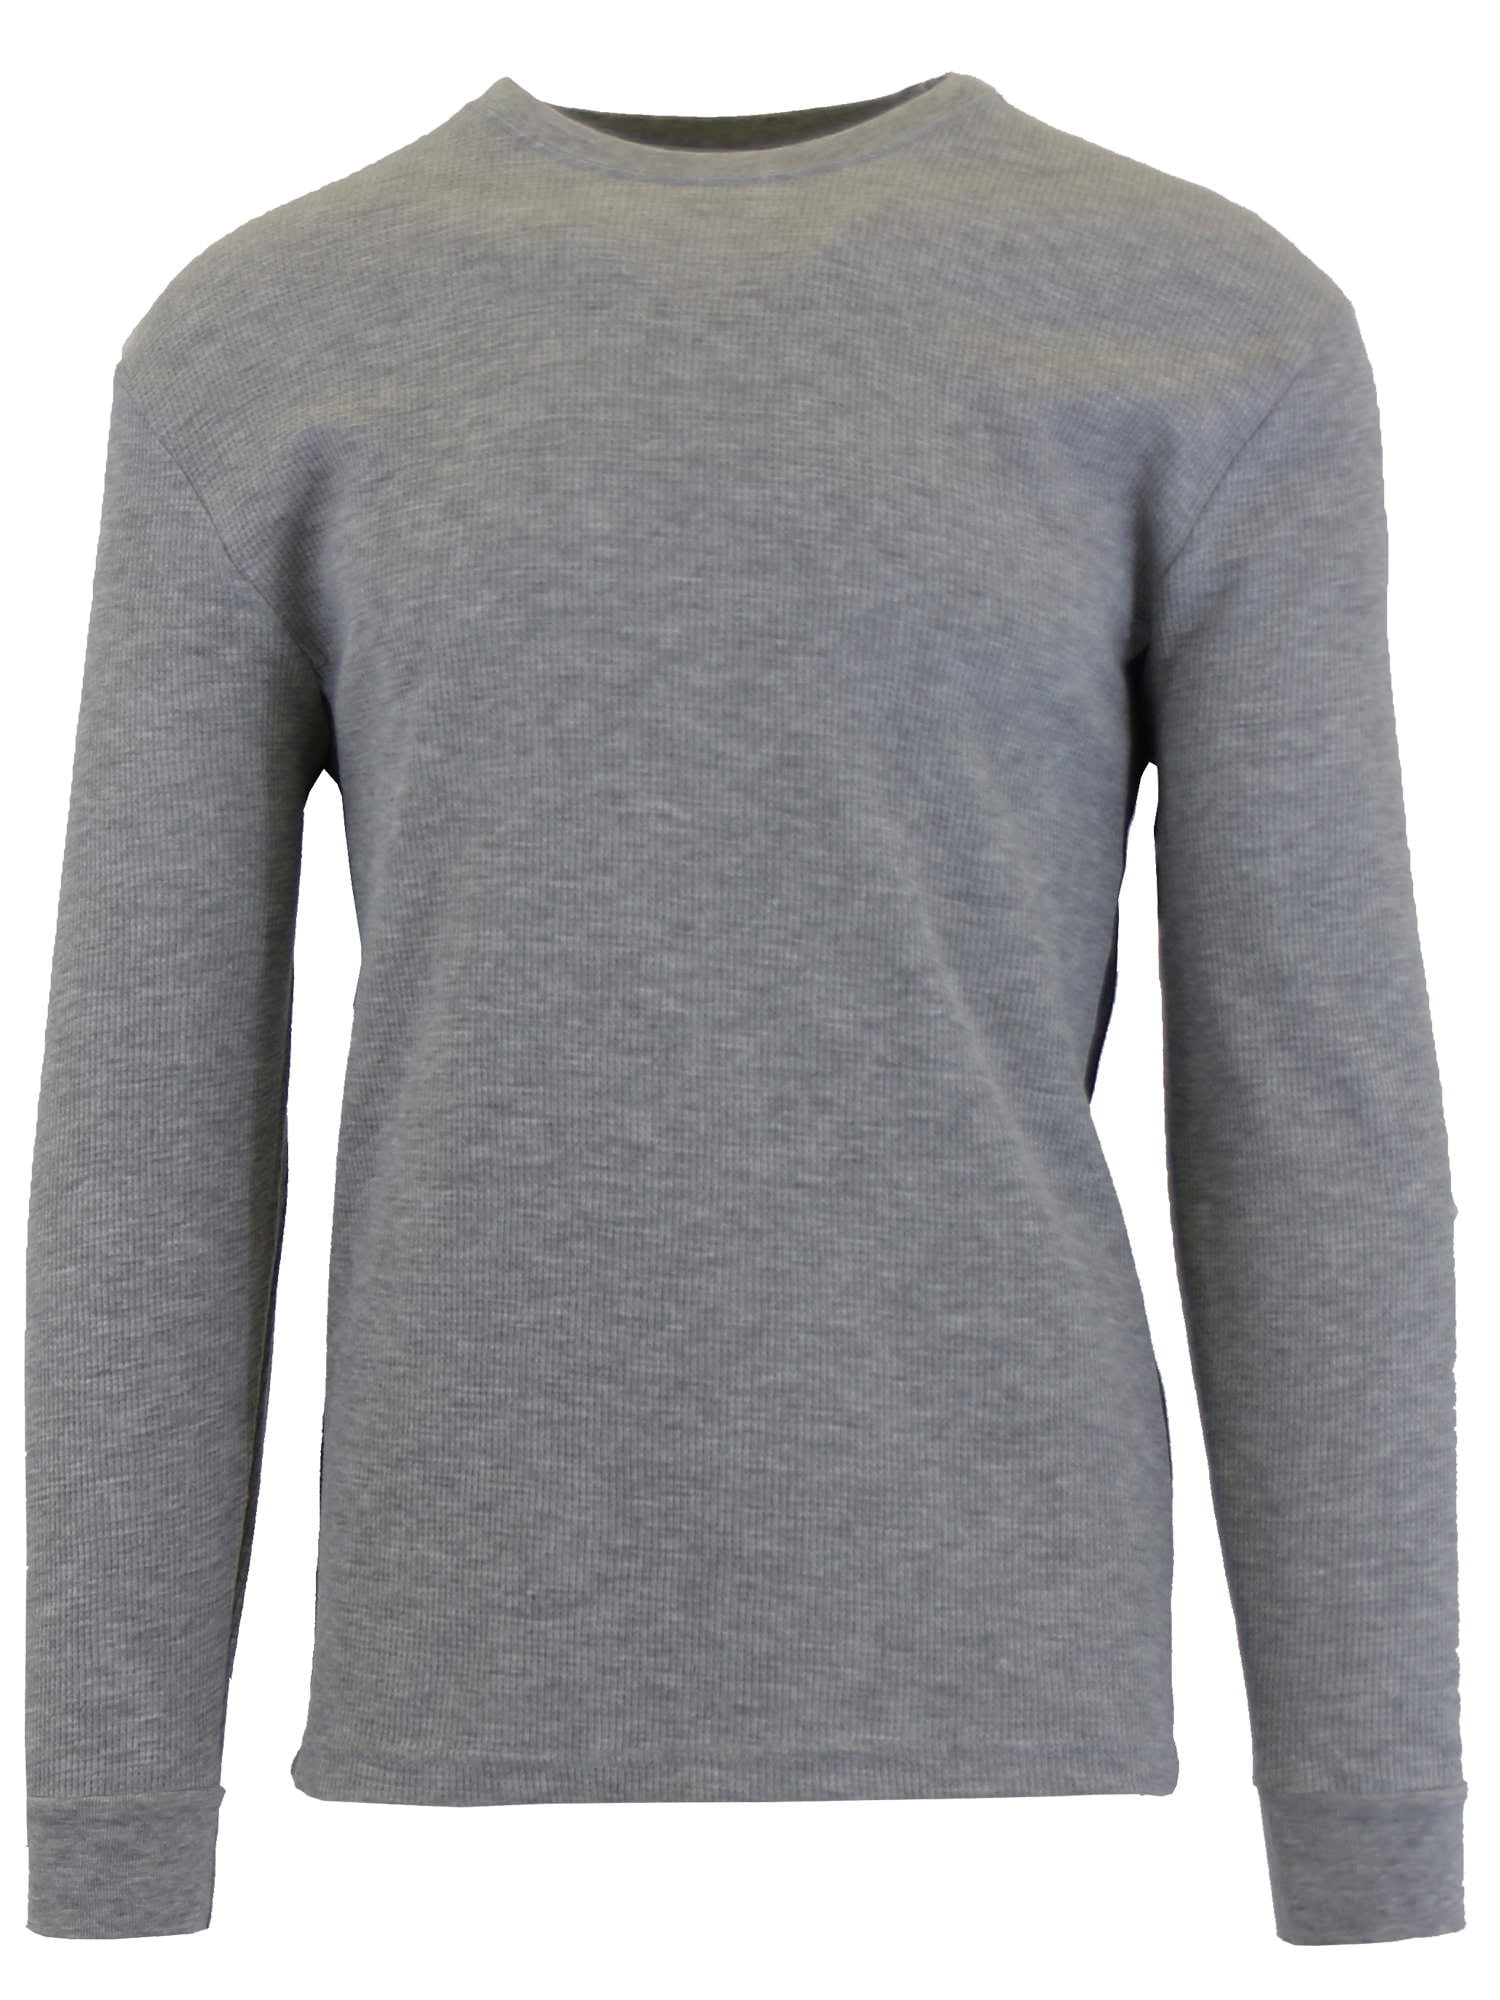 Men's Waffle-Knit Thermal Shirts With Contast Side Trim - Walmart.com